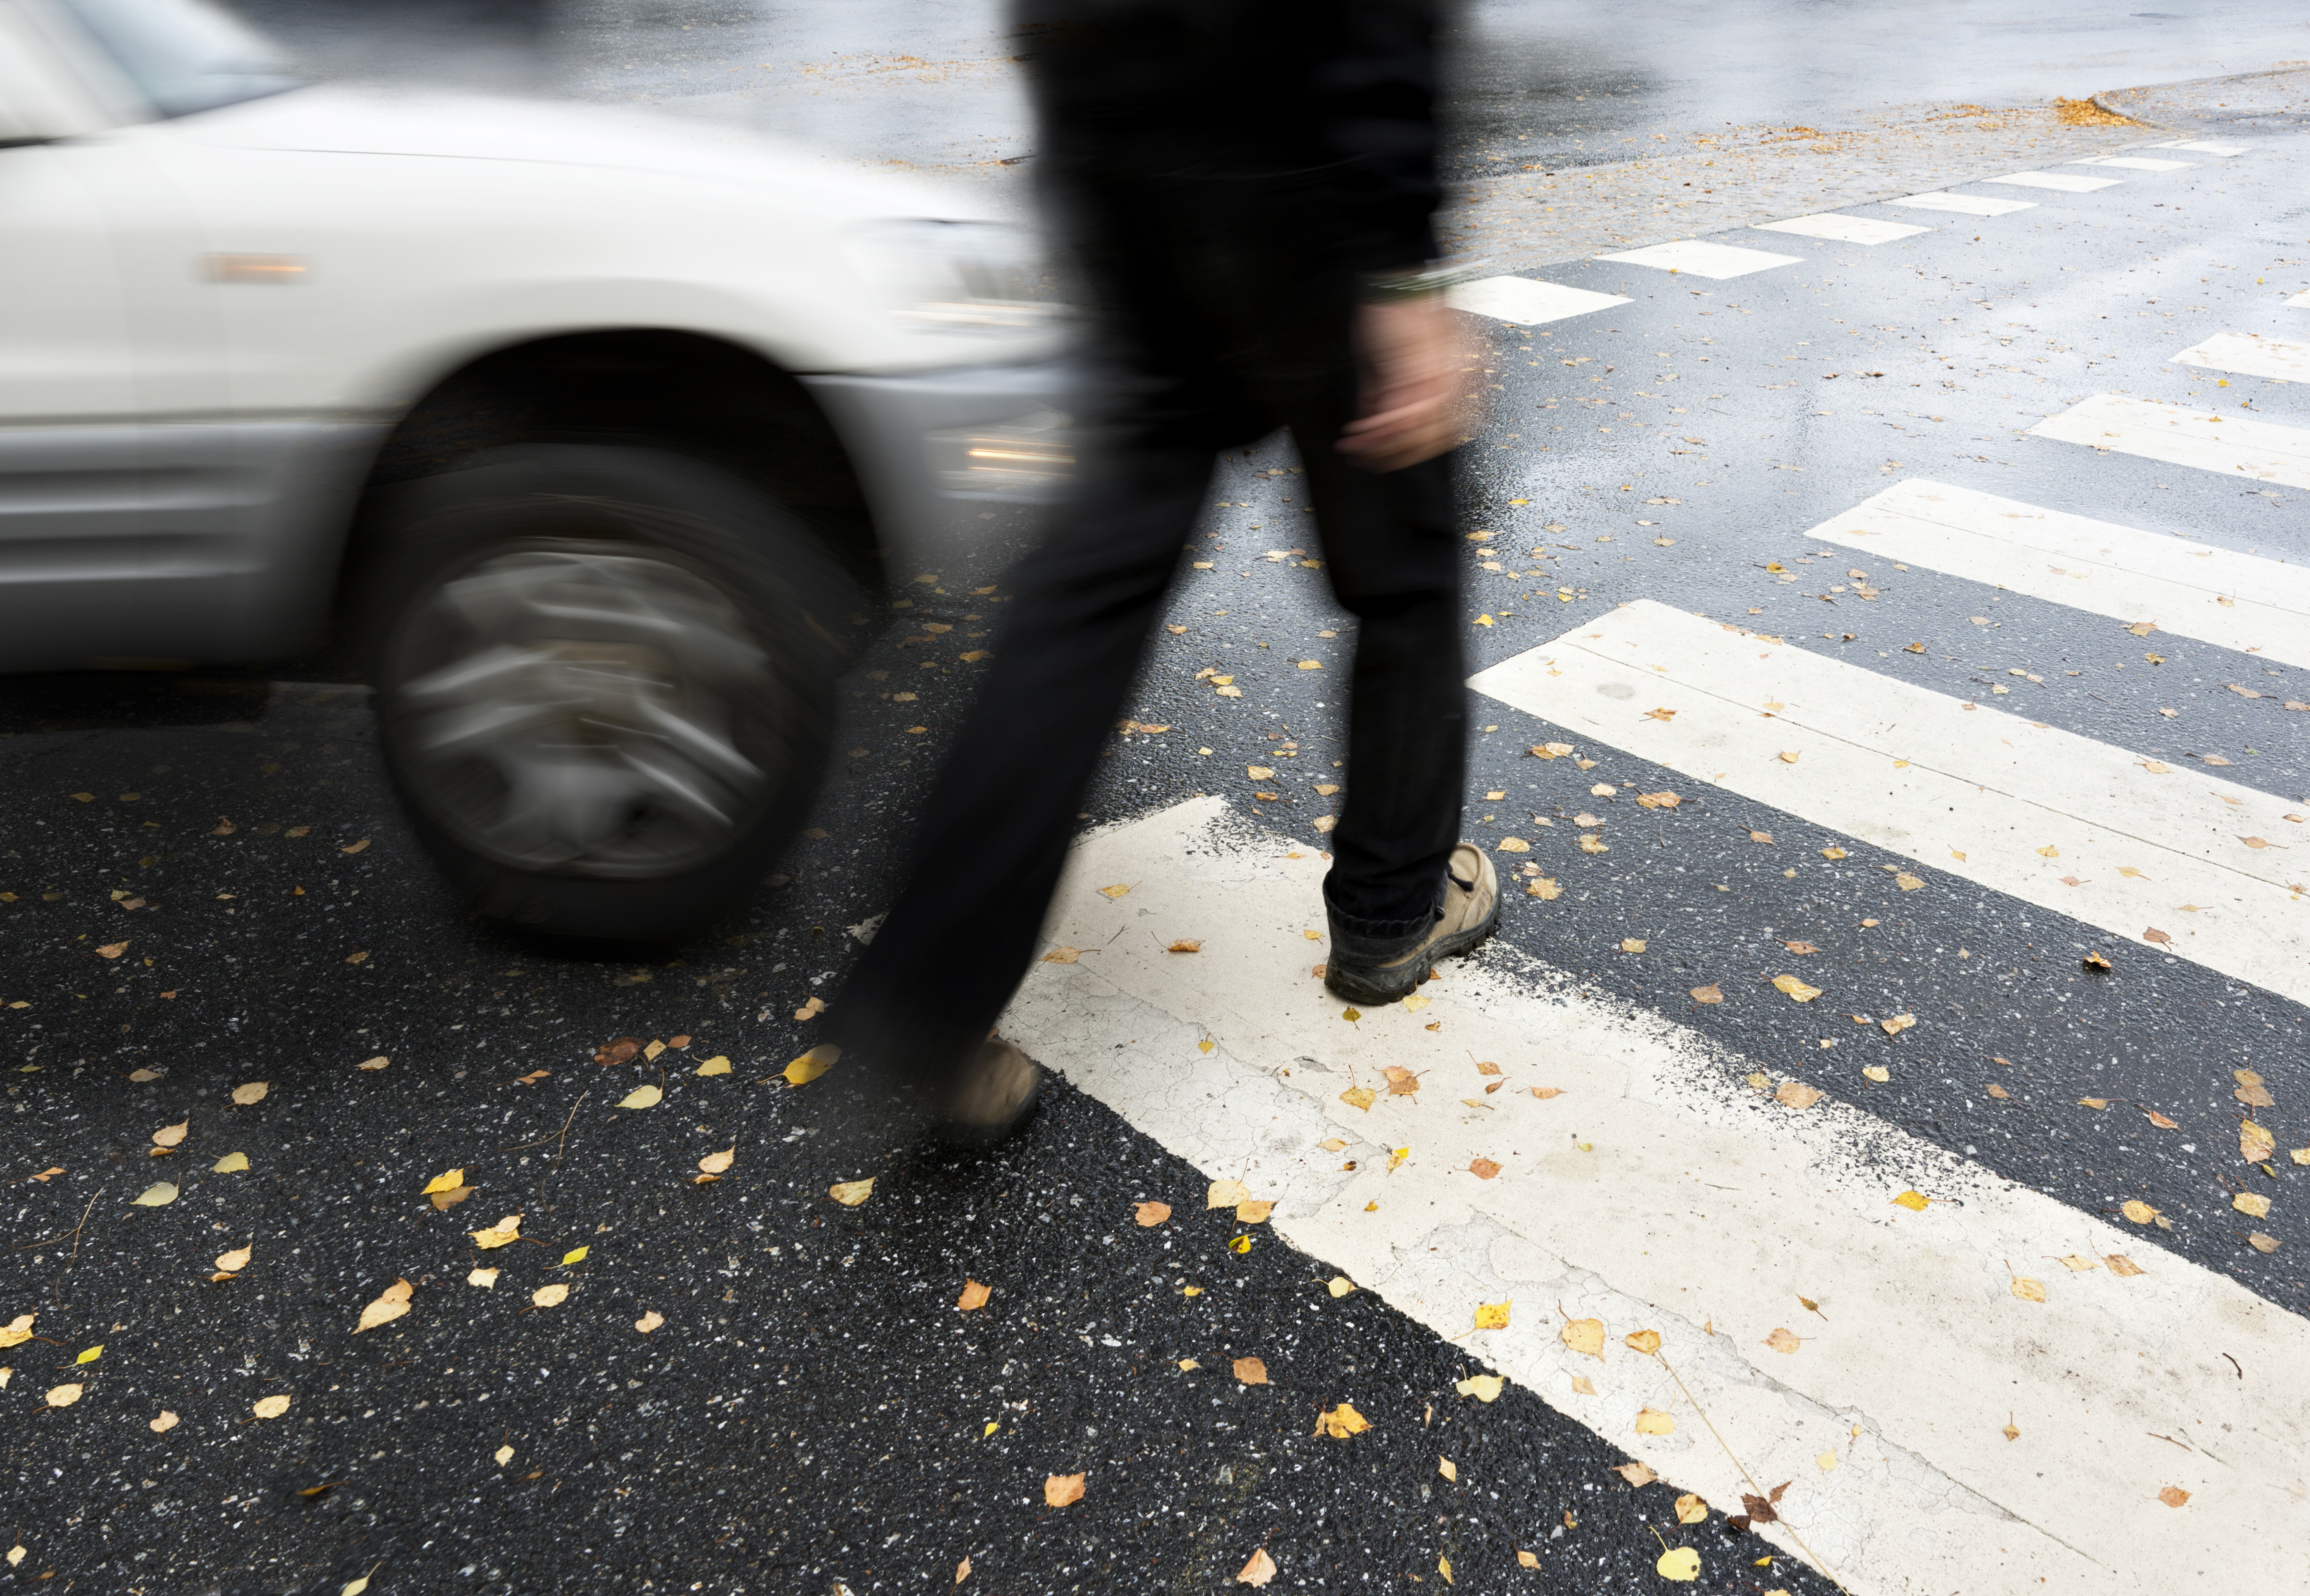 Ford drivers could get alerts from nearby pedestrians’ phones